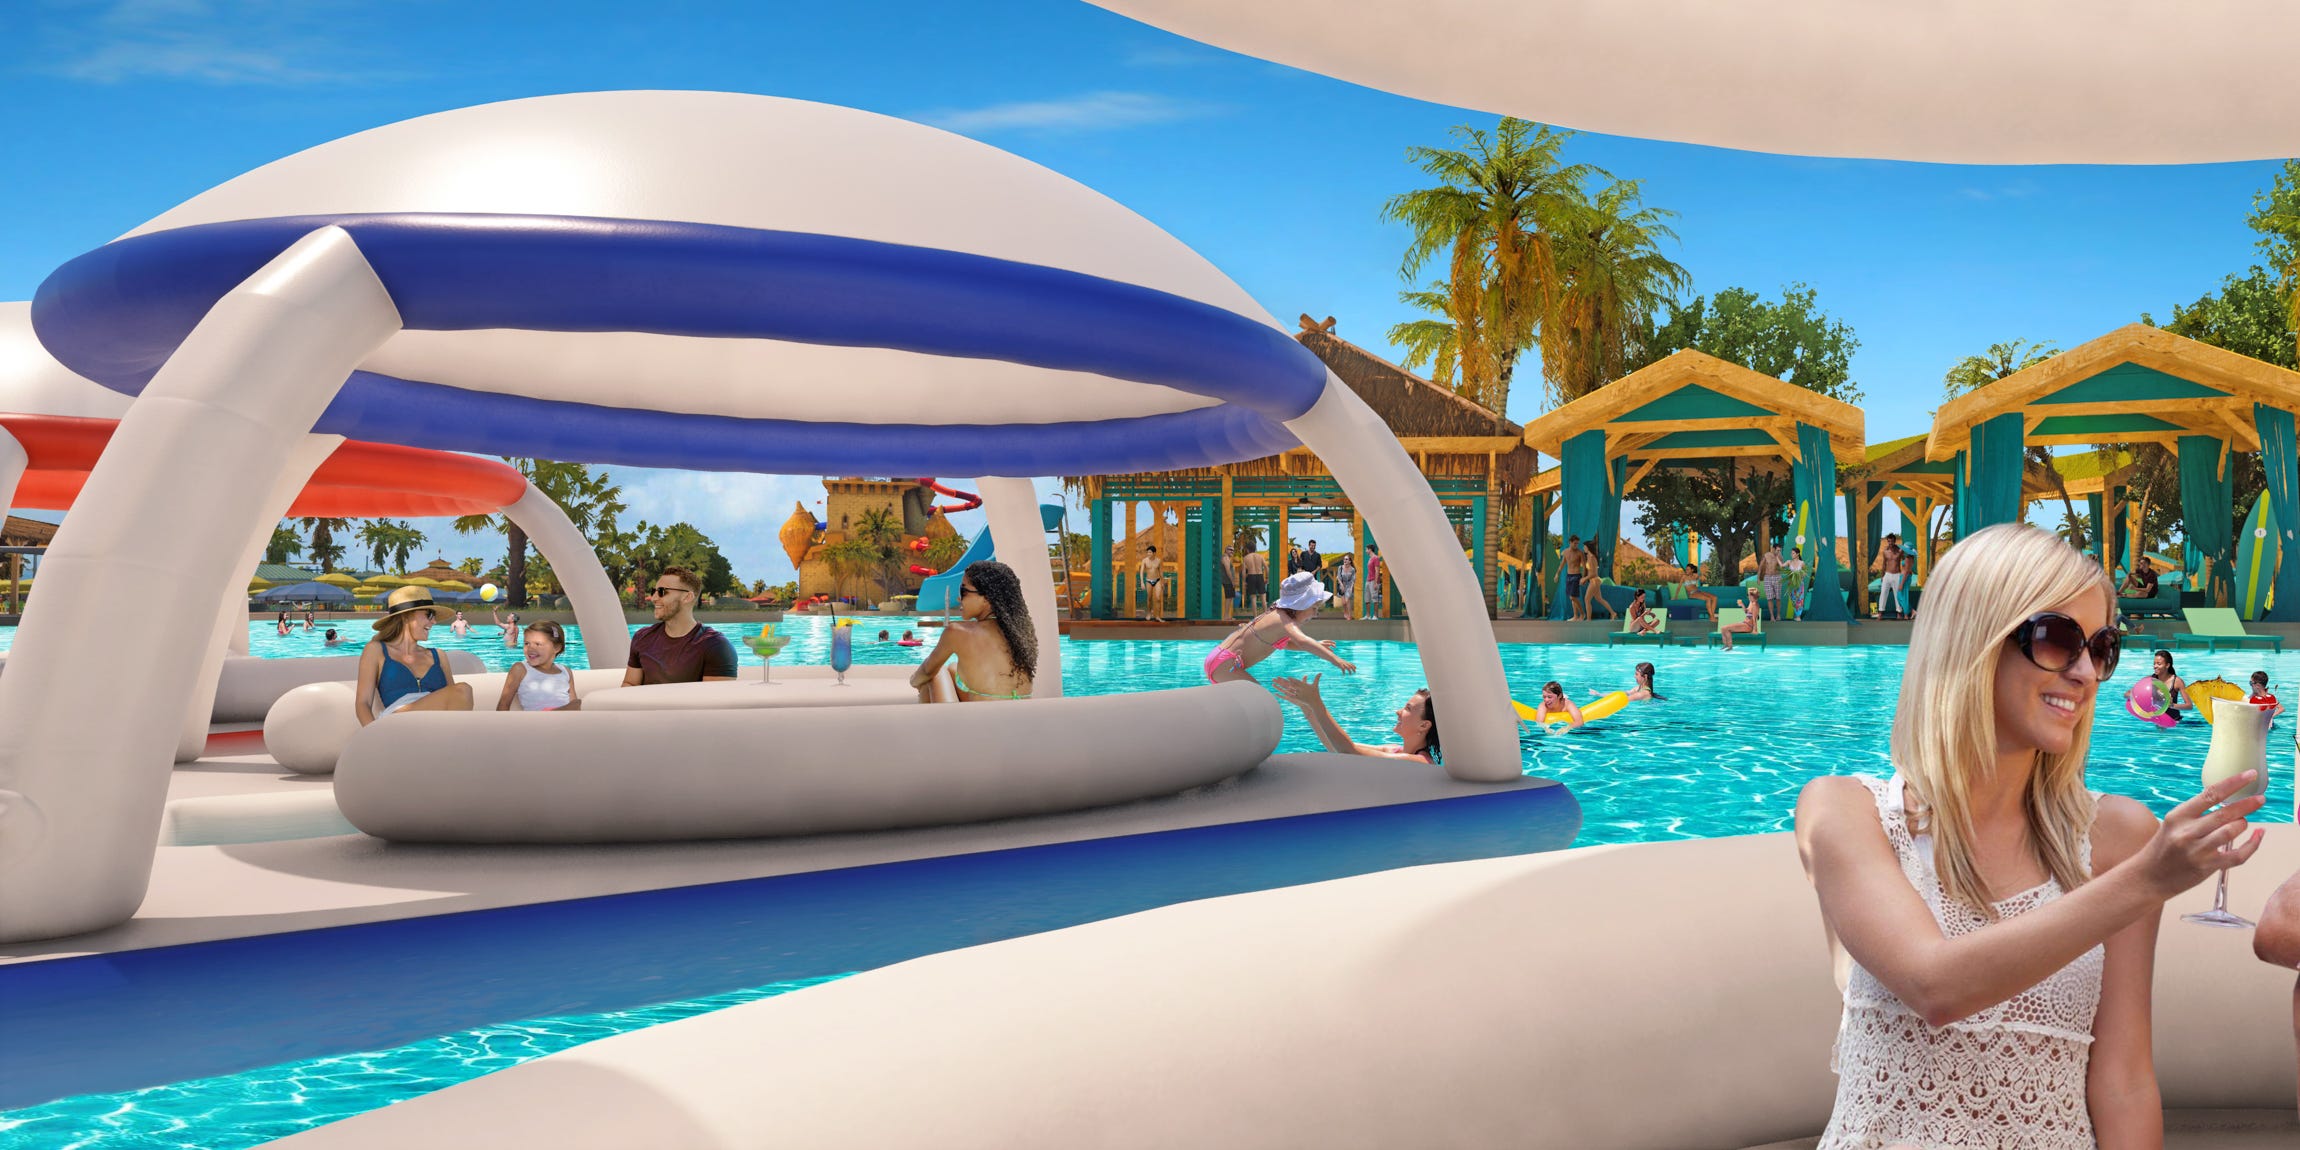 <p>Travelers at Perfect Day at CocoCay can splurge on private beach clubs, cabanas, shopping, food, and alcohol.</p><p>The same goes for Celebration Key. In fact, "You'd be surprised at how much people are willing to pay to rent cabanas for the day," Josh Weinstein, president and CEO of Carnival Corp, told investors in late March.</p><p>Like CocoCay, Carnival expects its private destination to be a big money maker with increased ticket revenue and "incremental in-port spending," Weinstein said. Plus, it'll be near Florida's major cruise ports, allowing Carnival to save money on fuel — another major benefit to owning <a href="https://www.businessinsider.com/why-cruise-lines-royal-caribbean-need-private-islands-2024-3">private Caribbean properties.</a></p>